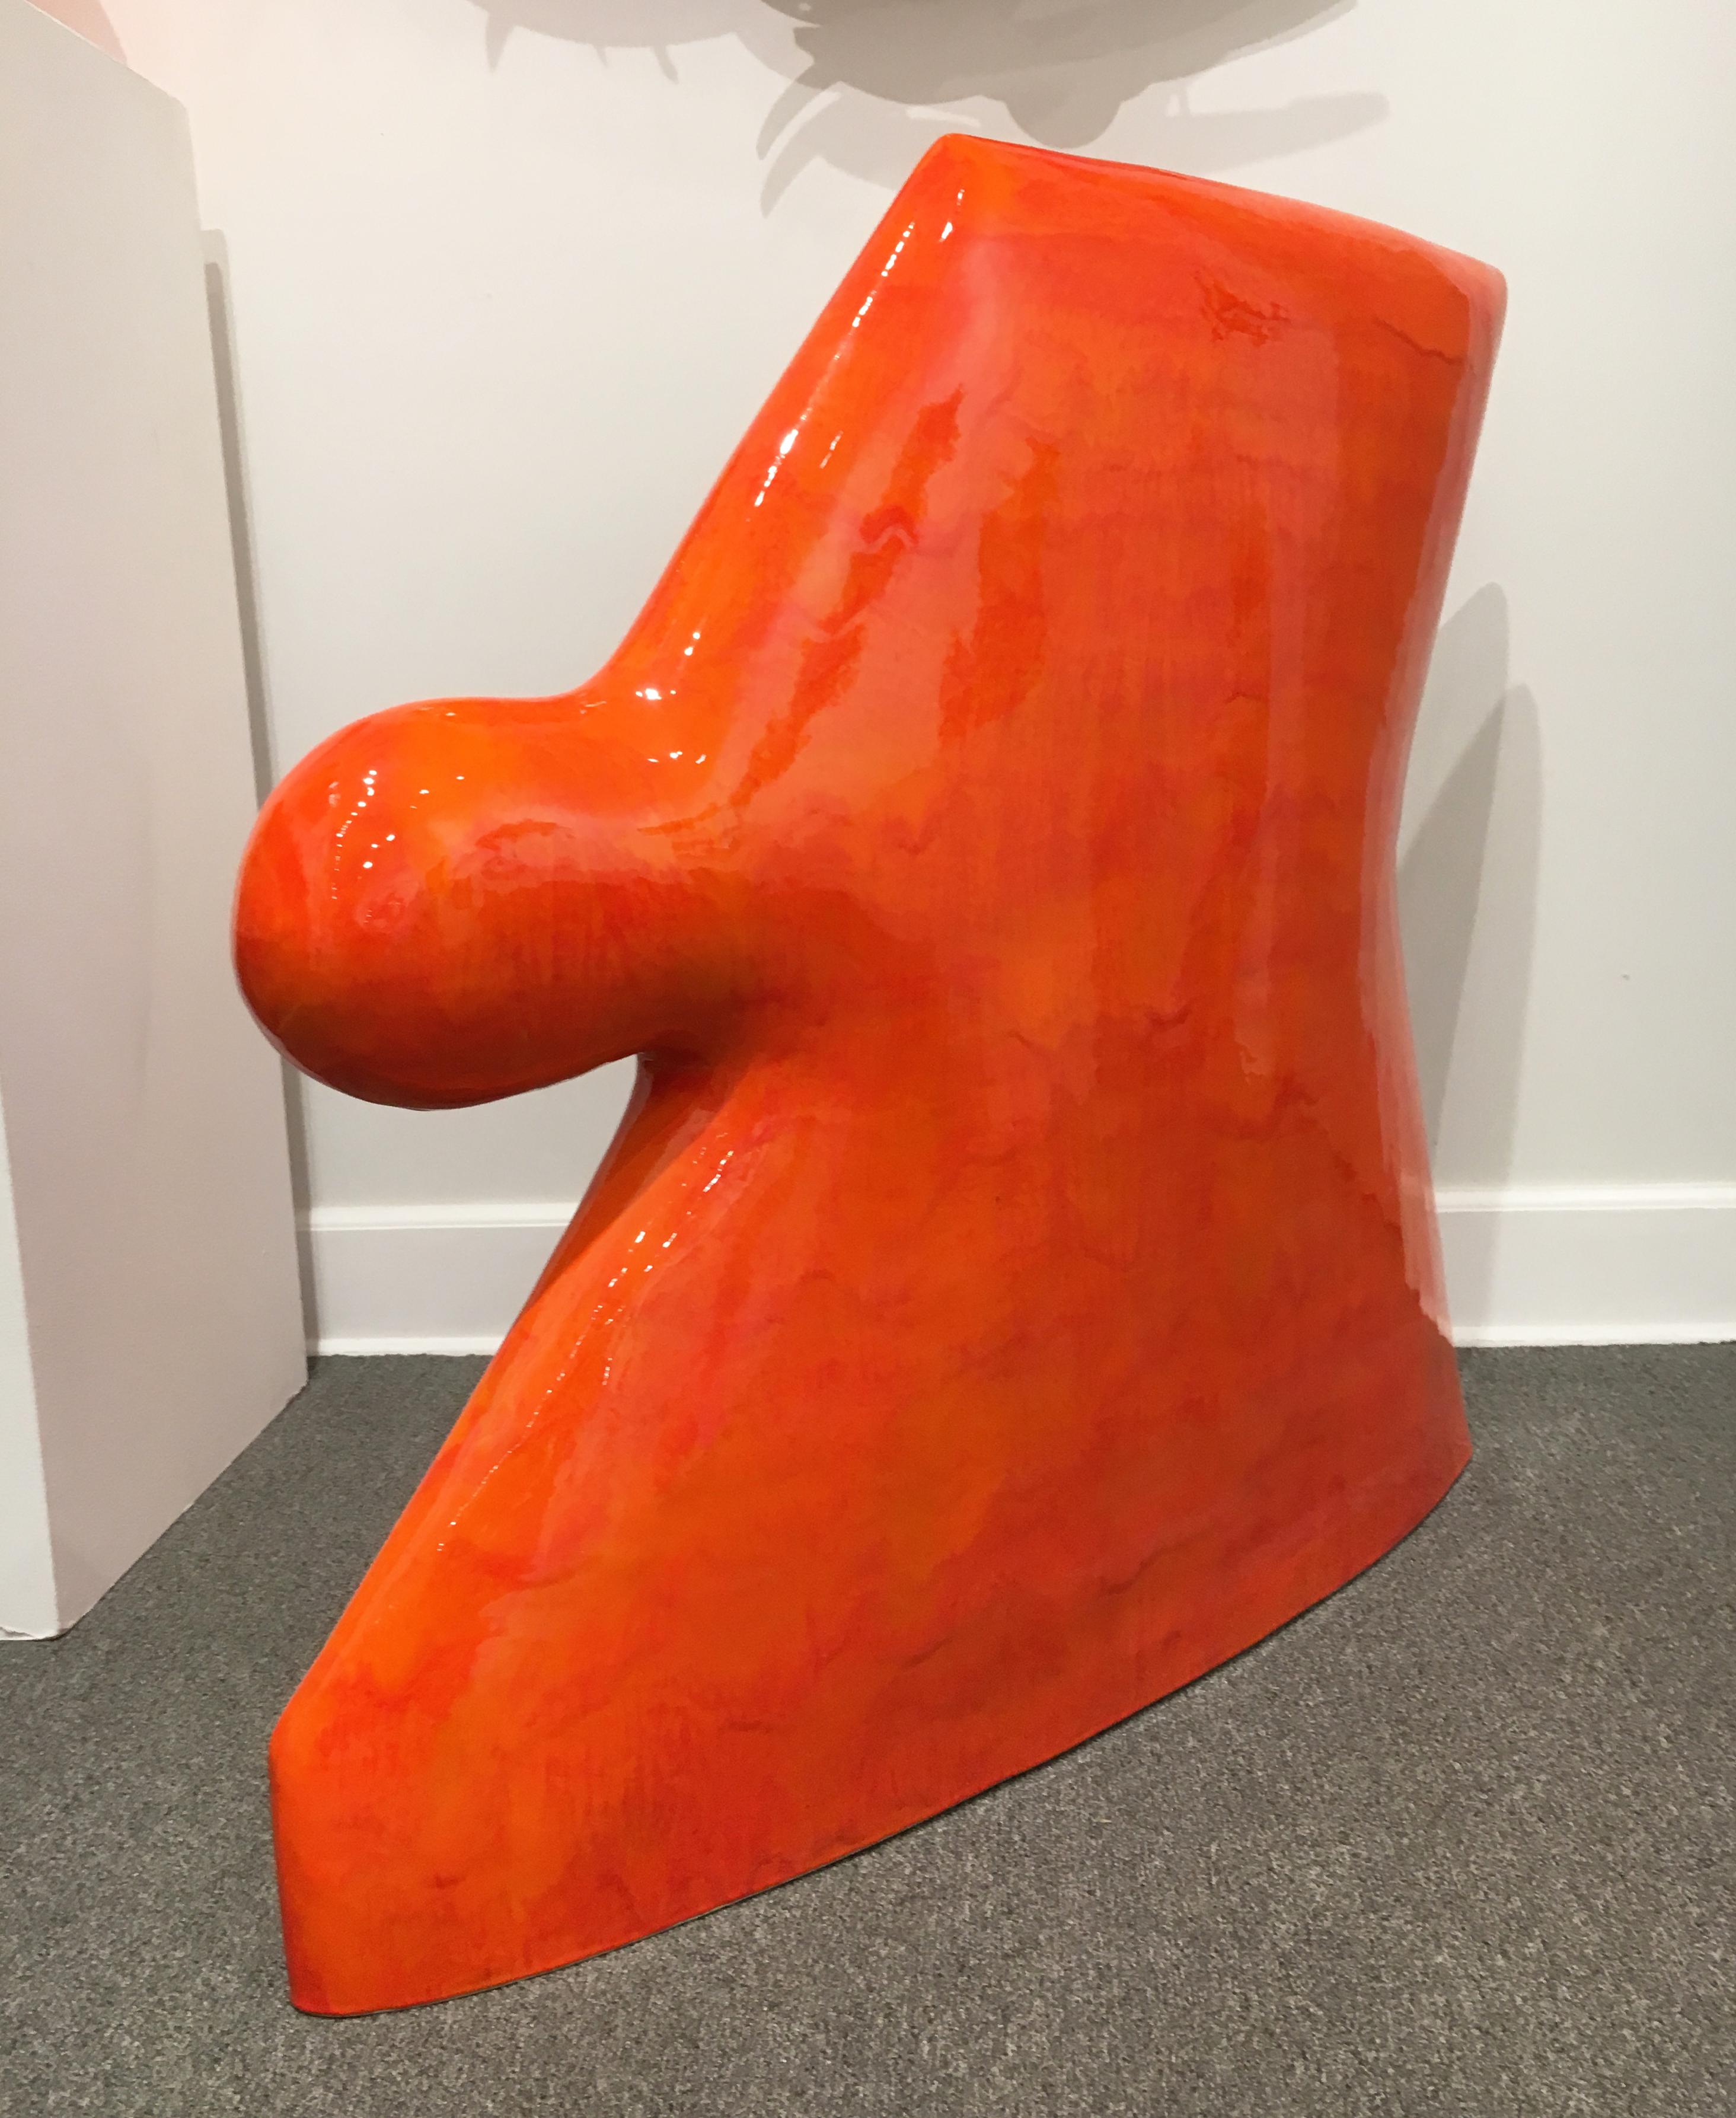 Contemporary Minimalist Ceramic Sculpture with Vibrant Orange Glaze, Abstract - Red Abstract Sculpture by James Marshall